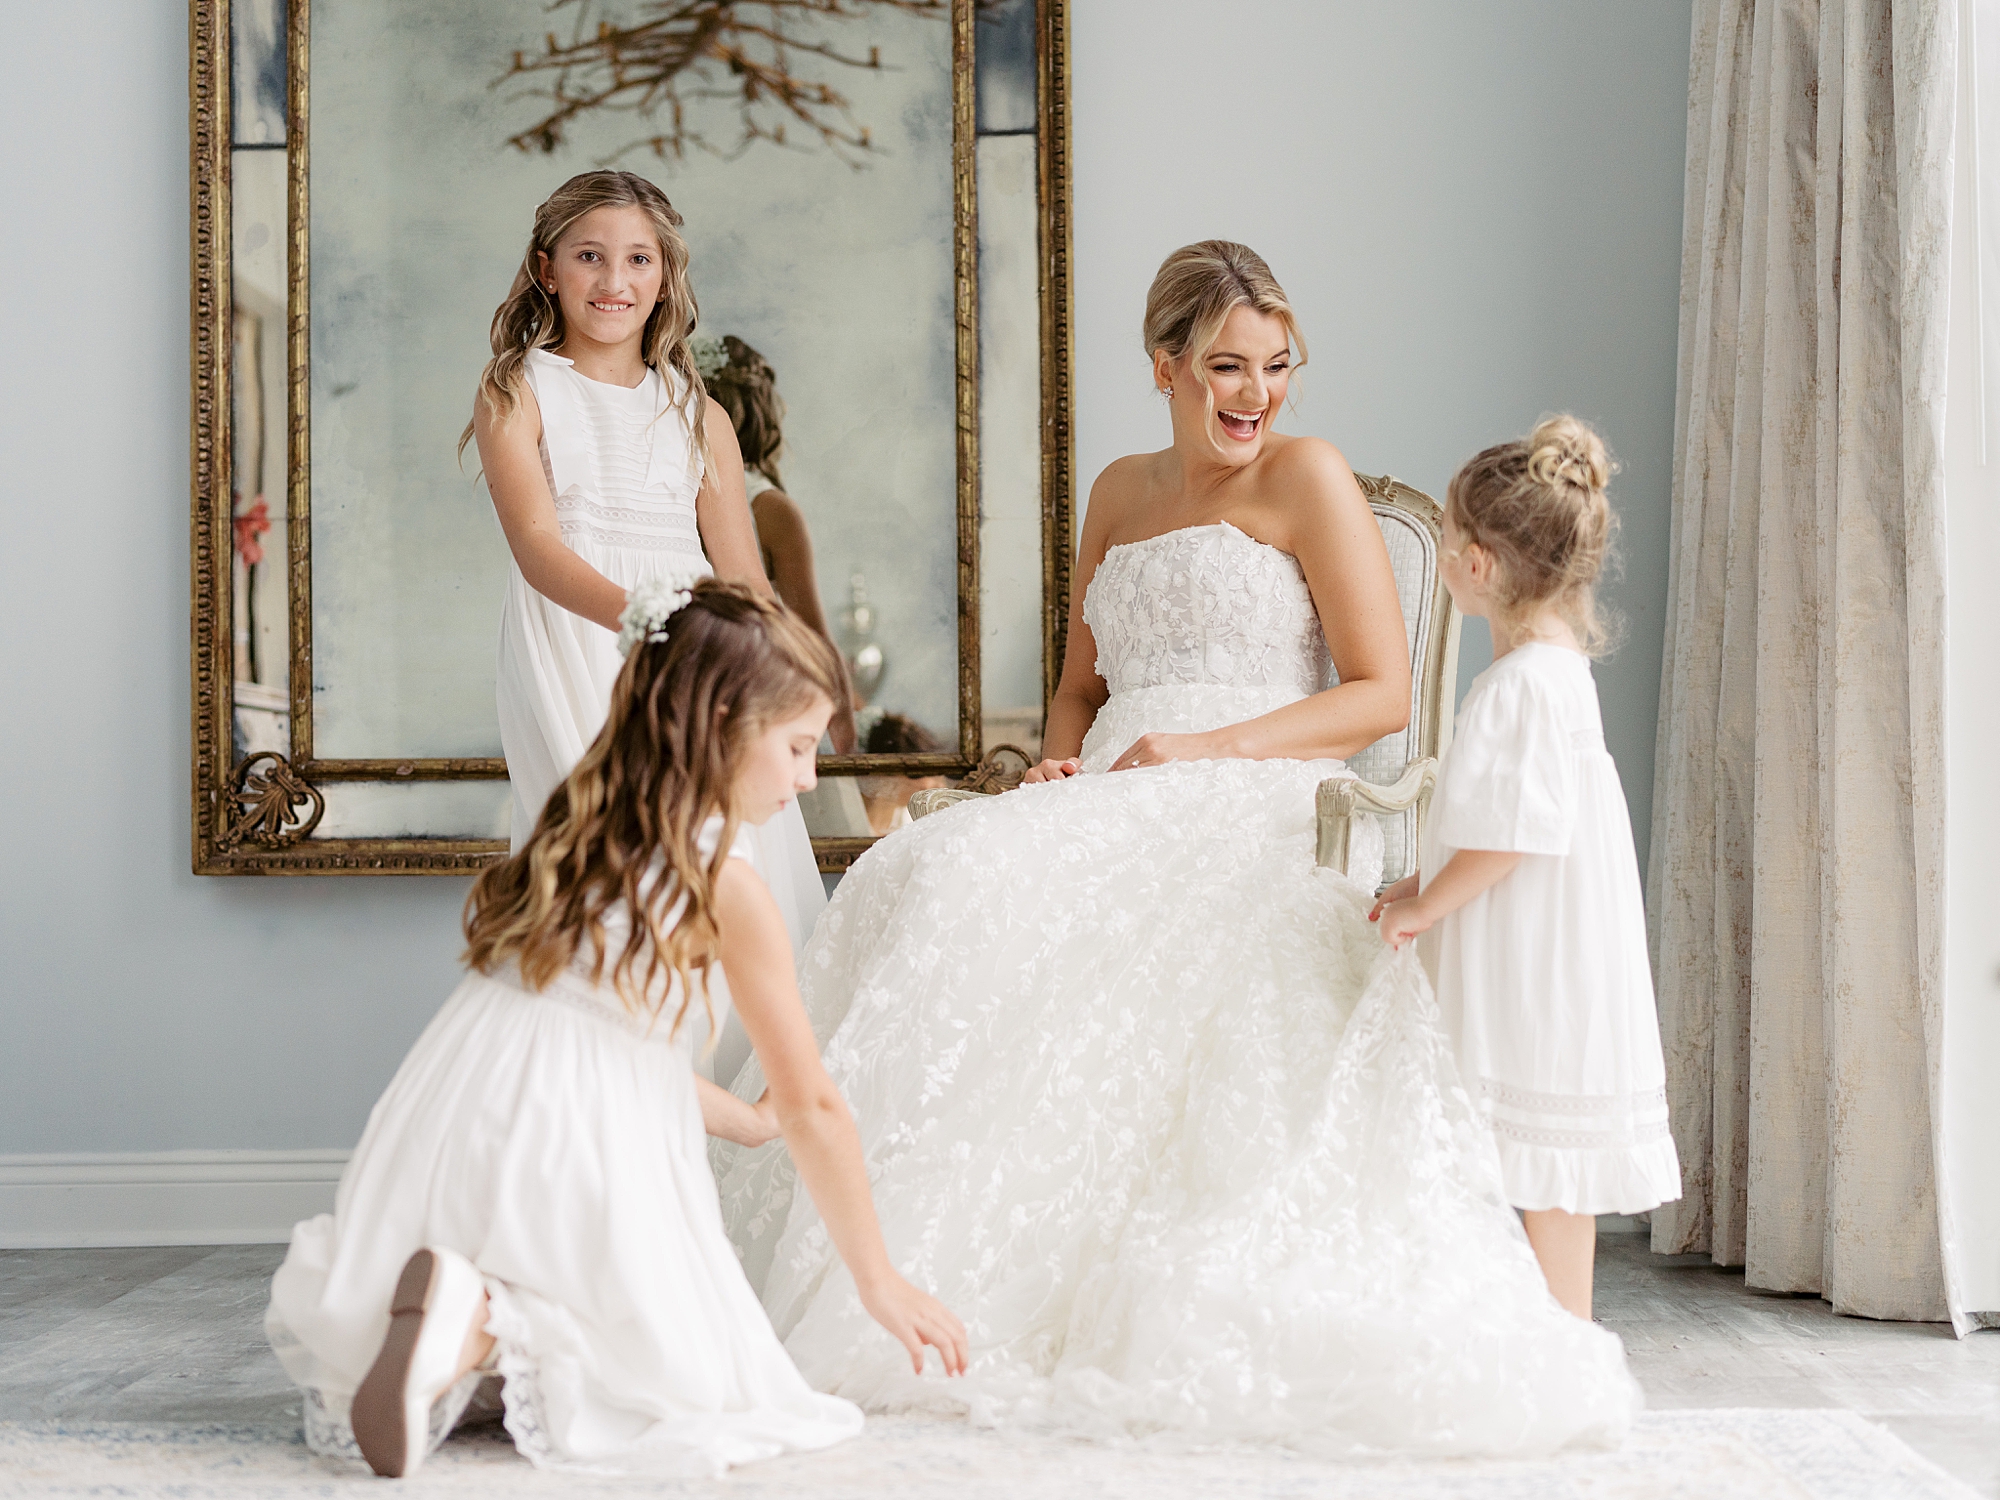 flower girls pose with bride in wedding gown at Le Pavilion Hotel